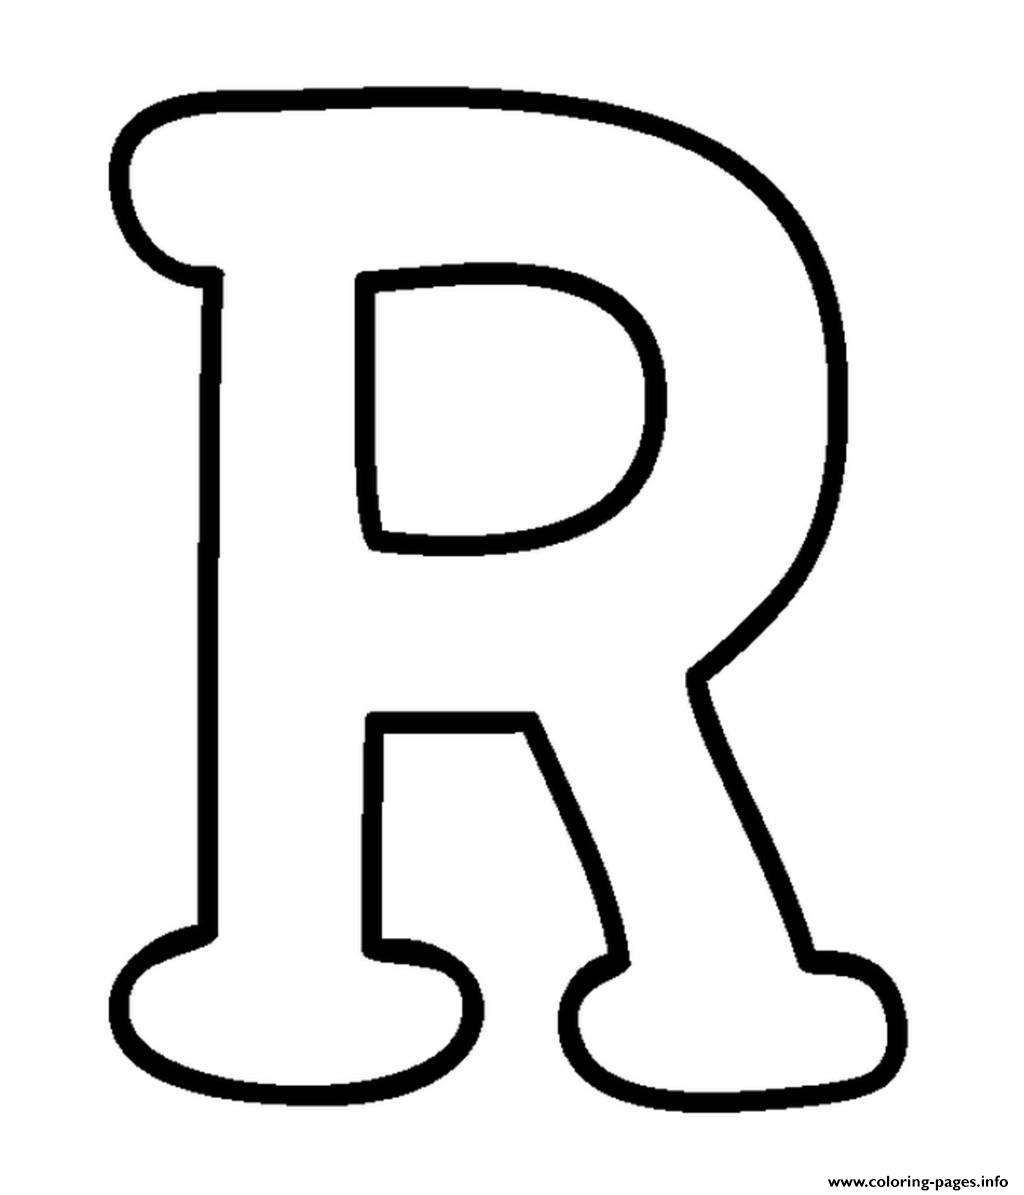 Big R Free Alphabet Sdf69 coloring pages